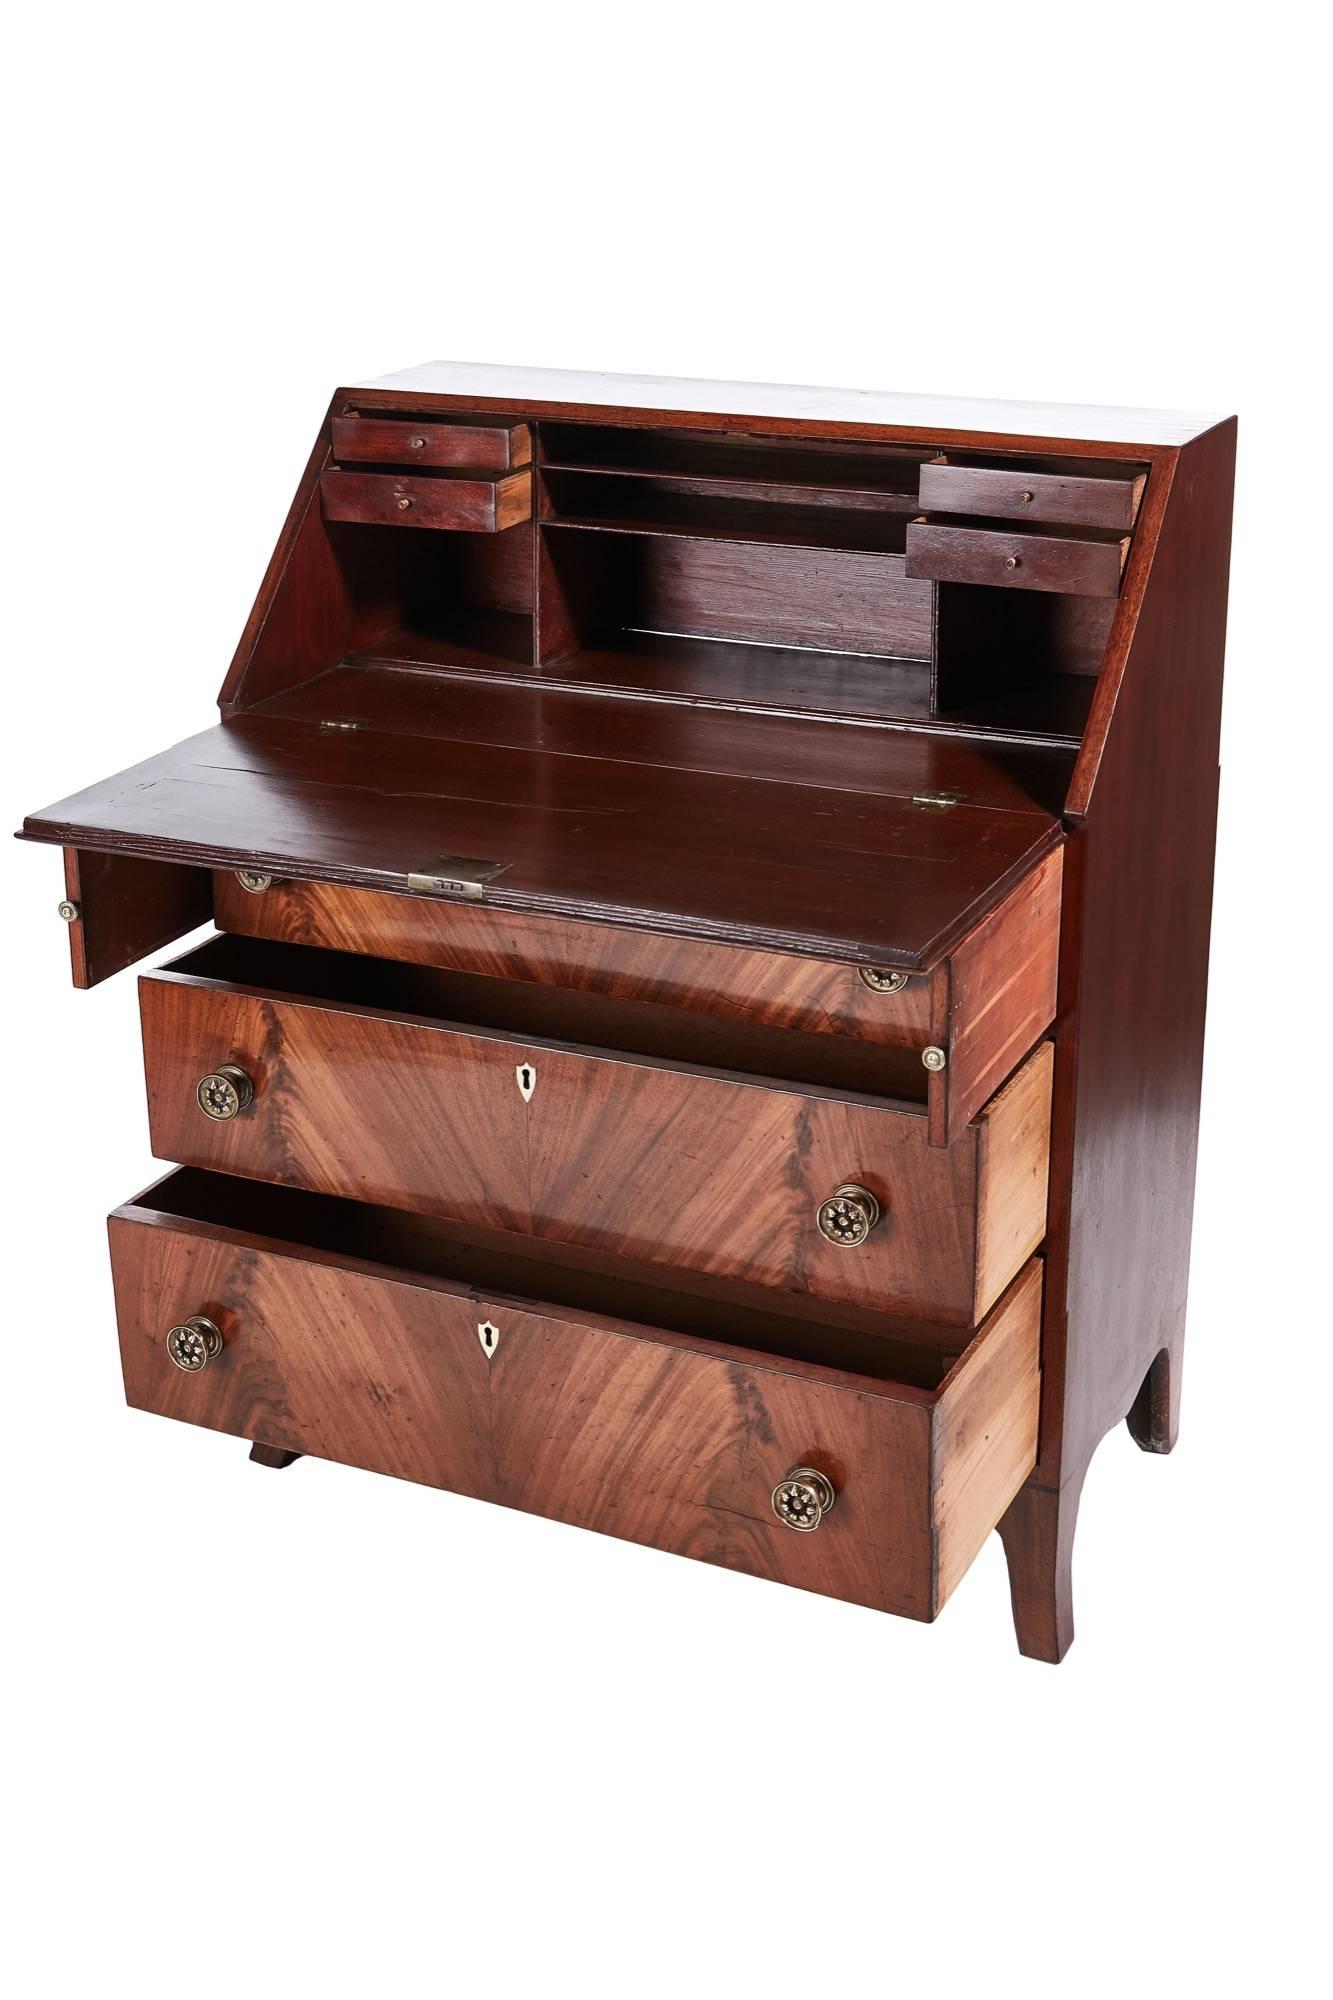 Antique mahogany bureau, having three long drawers with original brass handles, the mahogany cross-banded fall opens to a four-drawer fitted interior, standing on tall slender shaped bracket feet with a serpentine apron.
Lovely color and